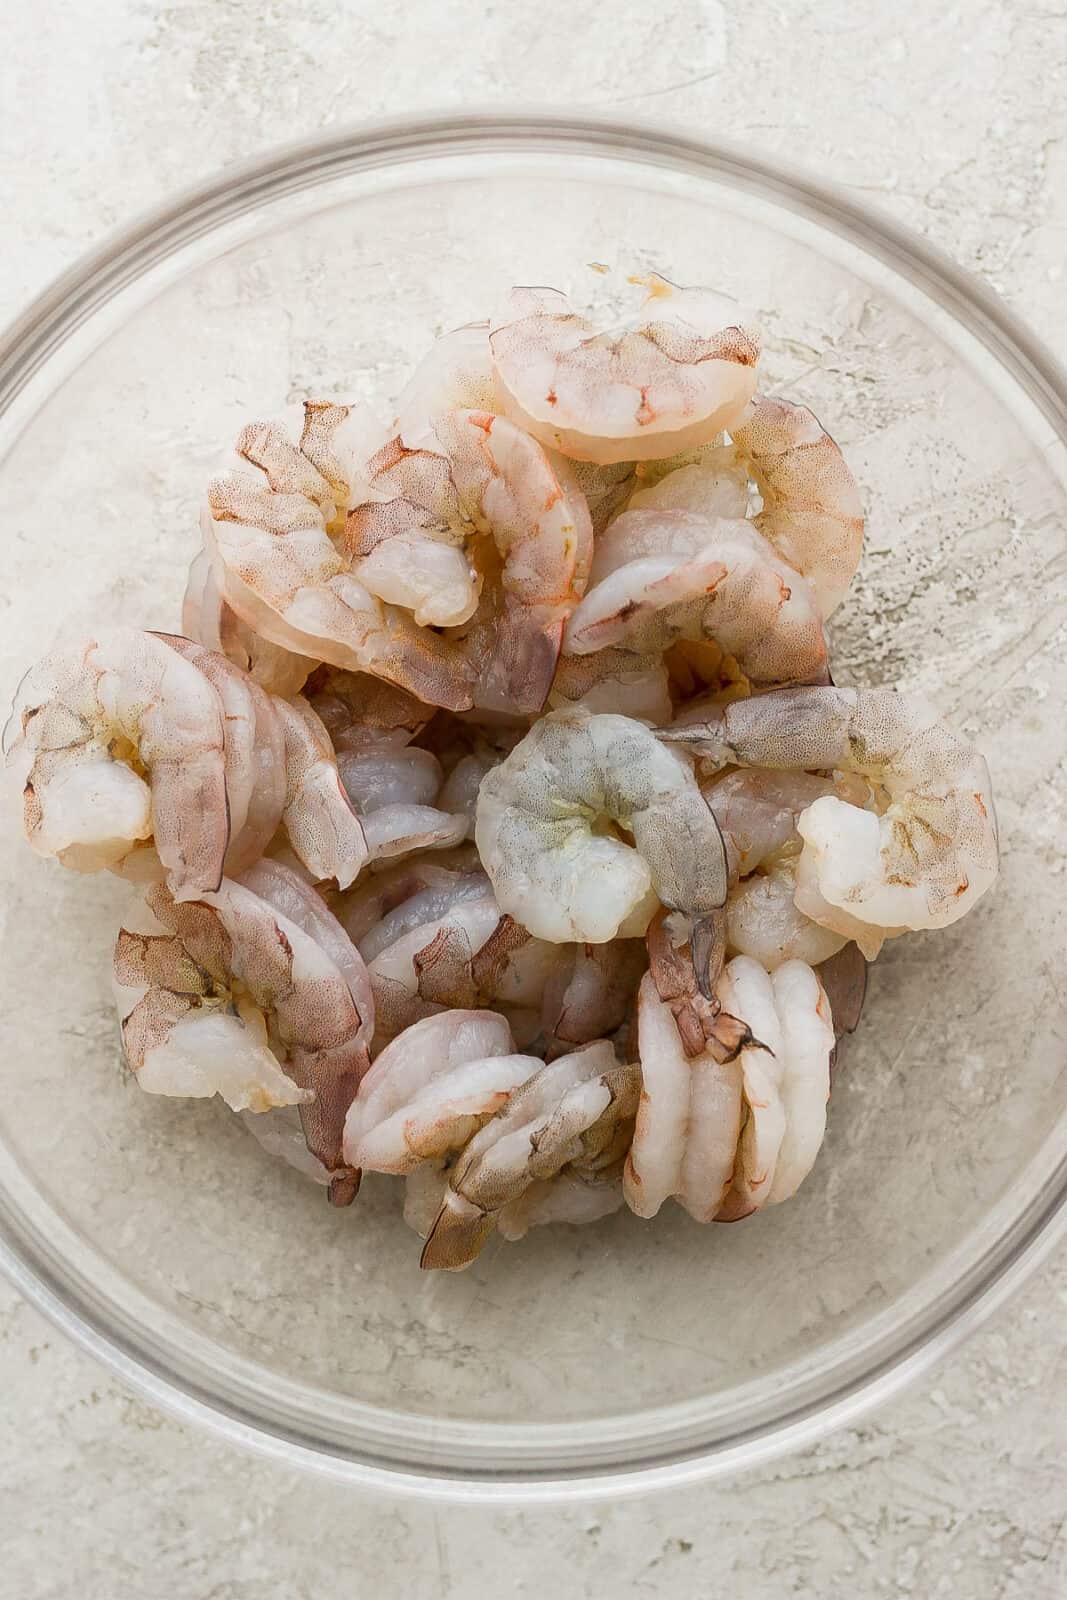 A bowl of thawed shrimp with tails removed.